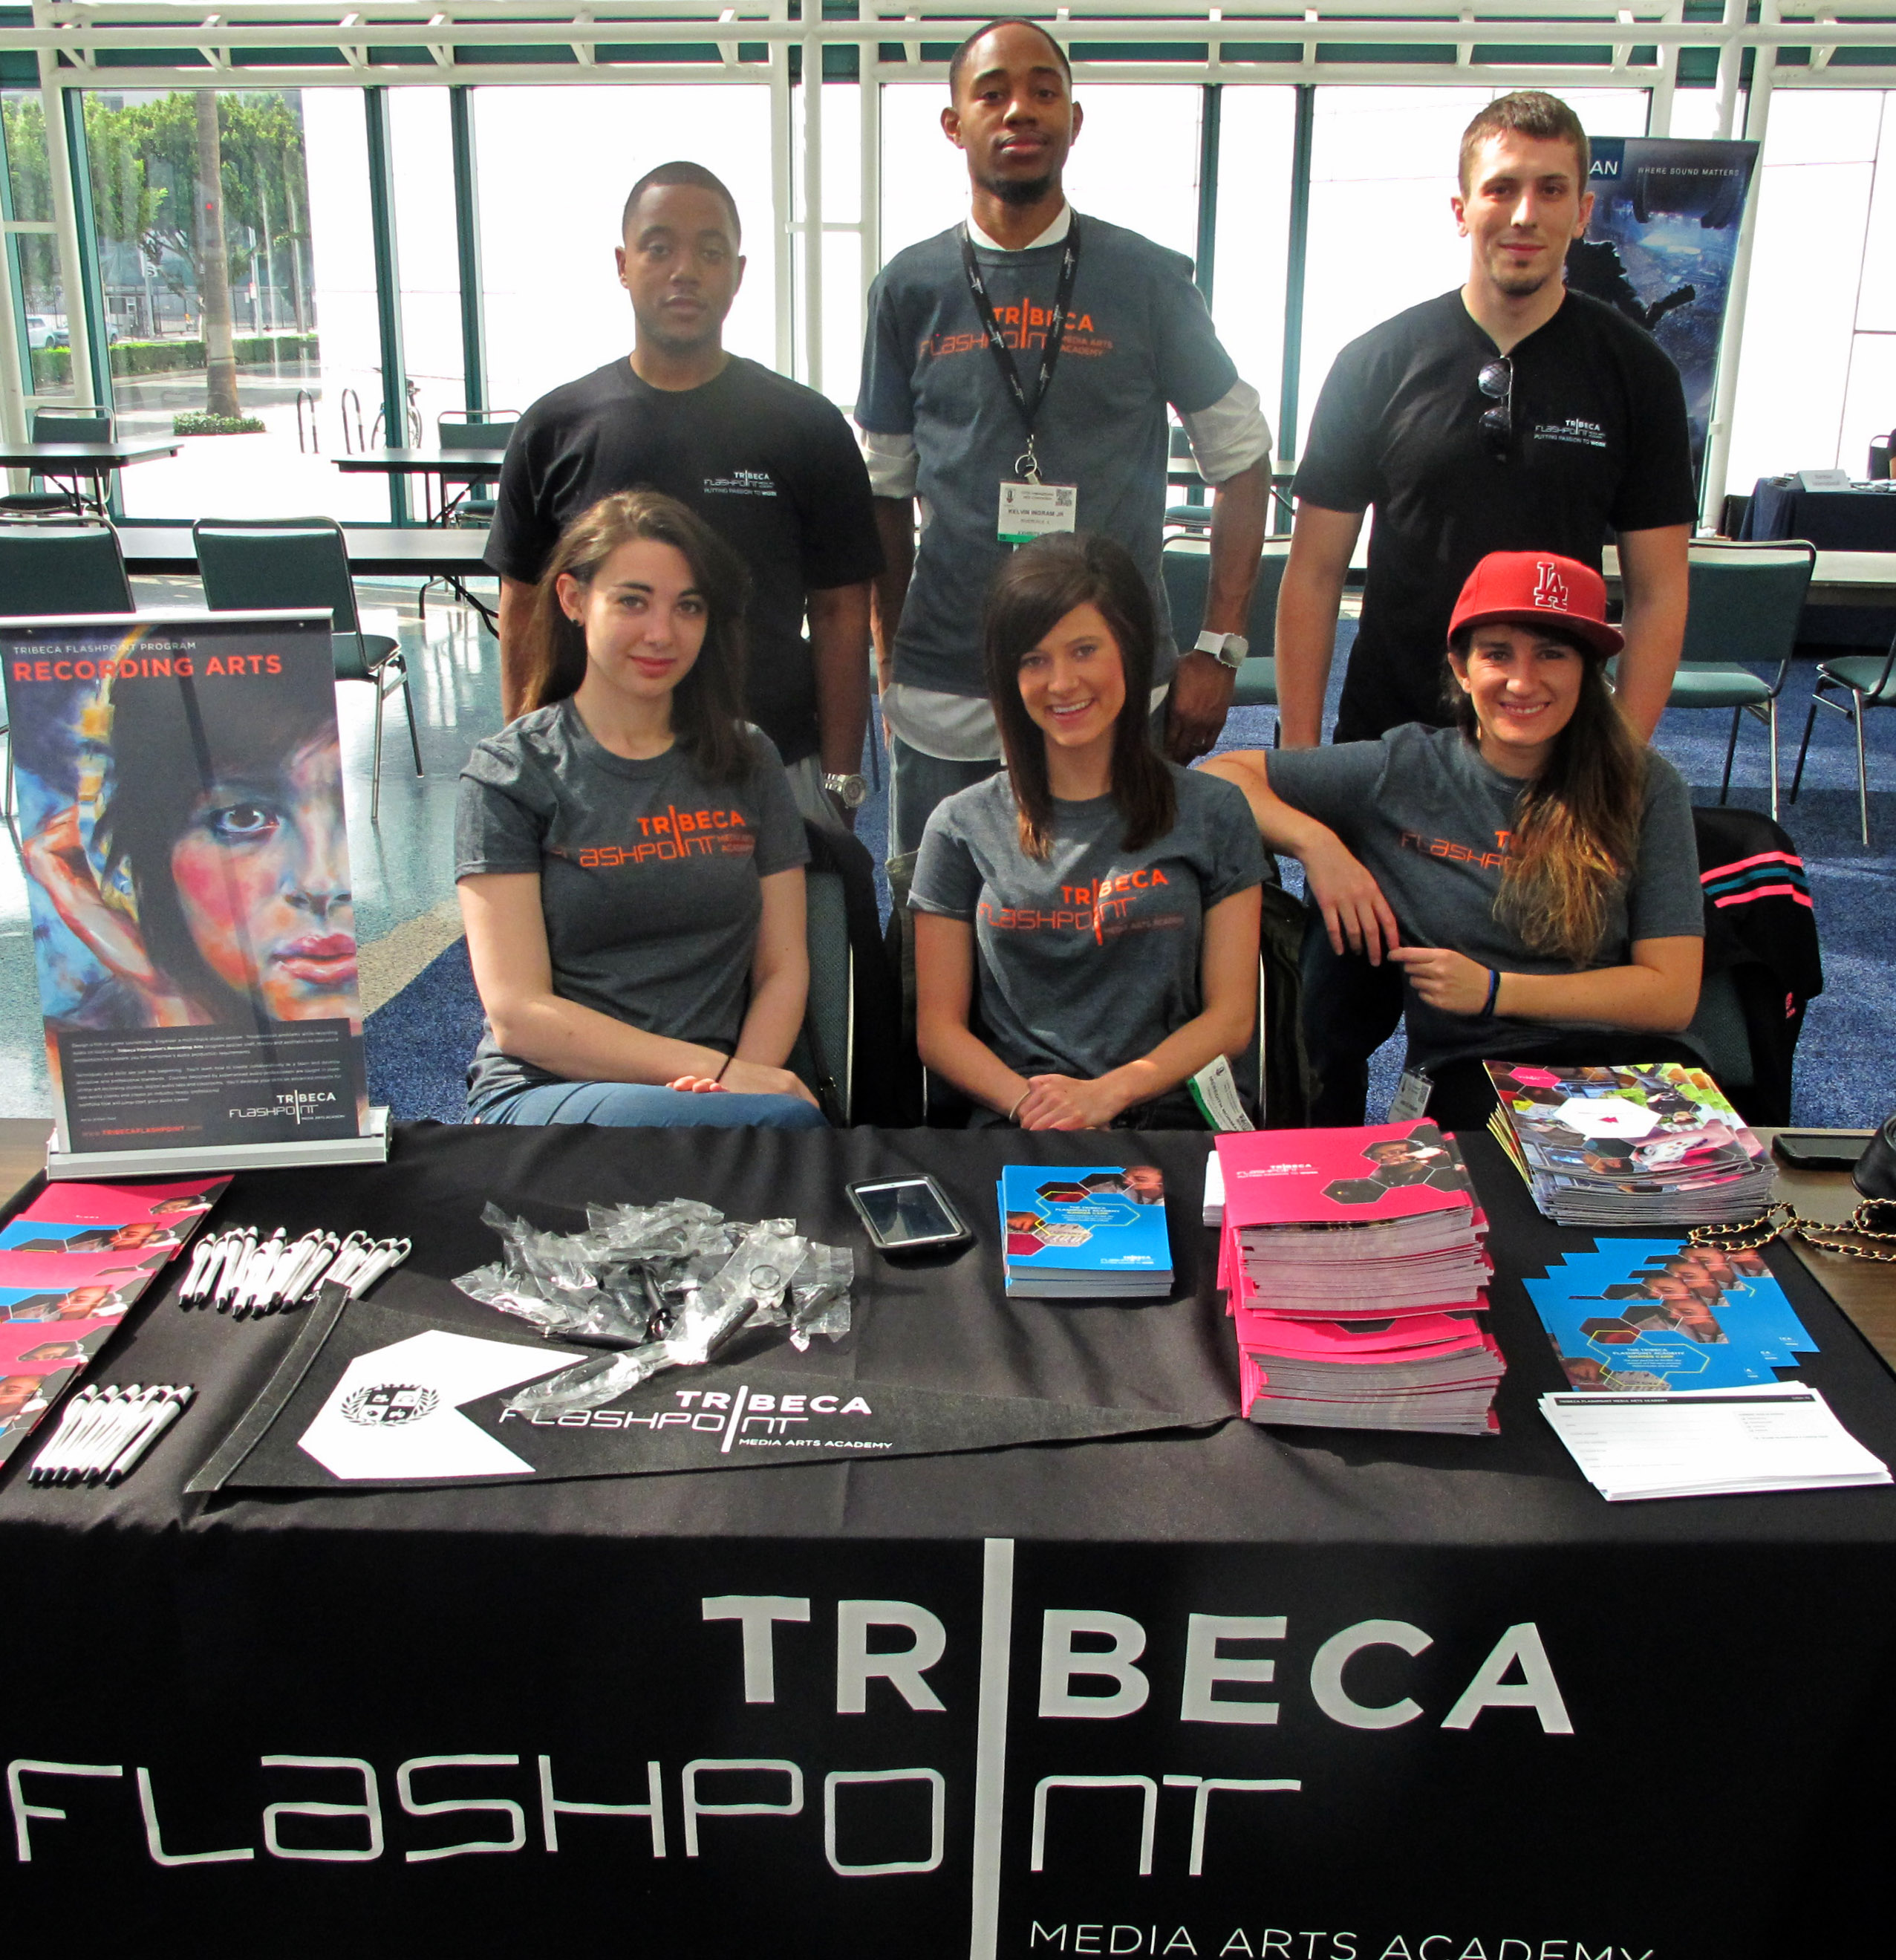 Tribeca Flashpoint College